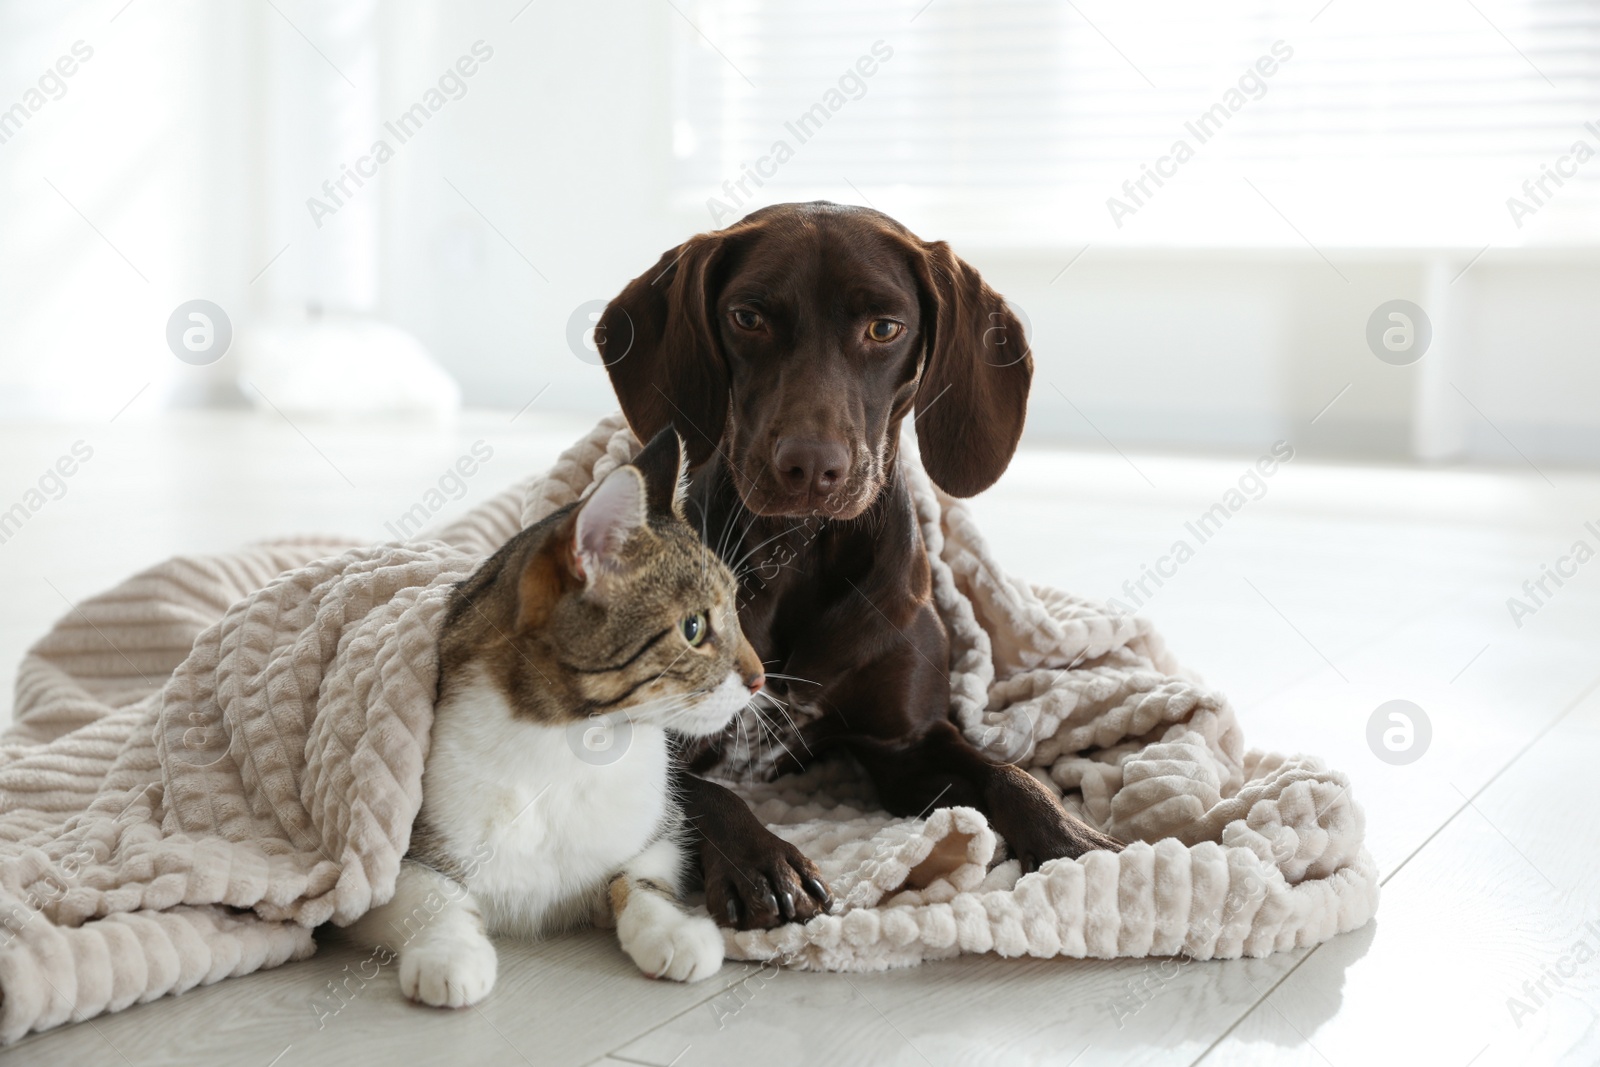 Photo of Adorable cat and dog together under plaid on floor indoors